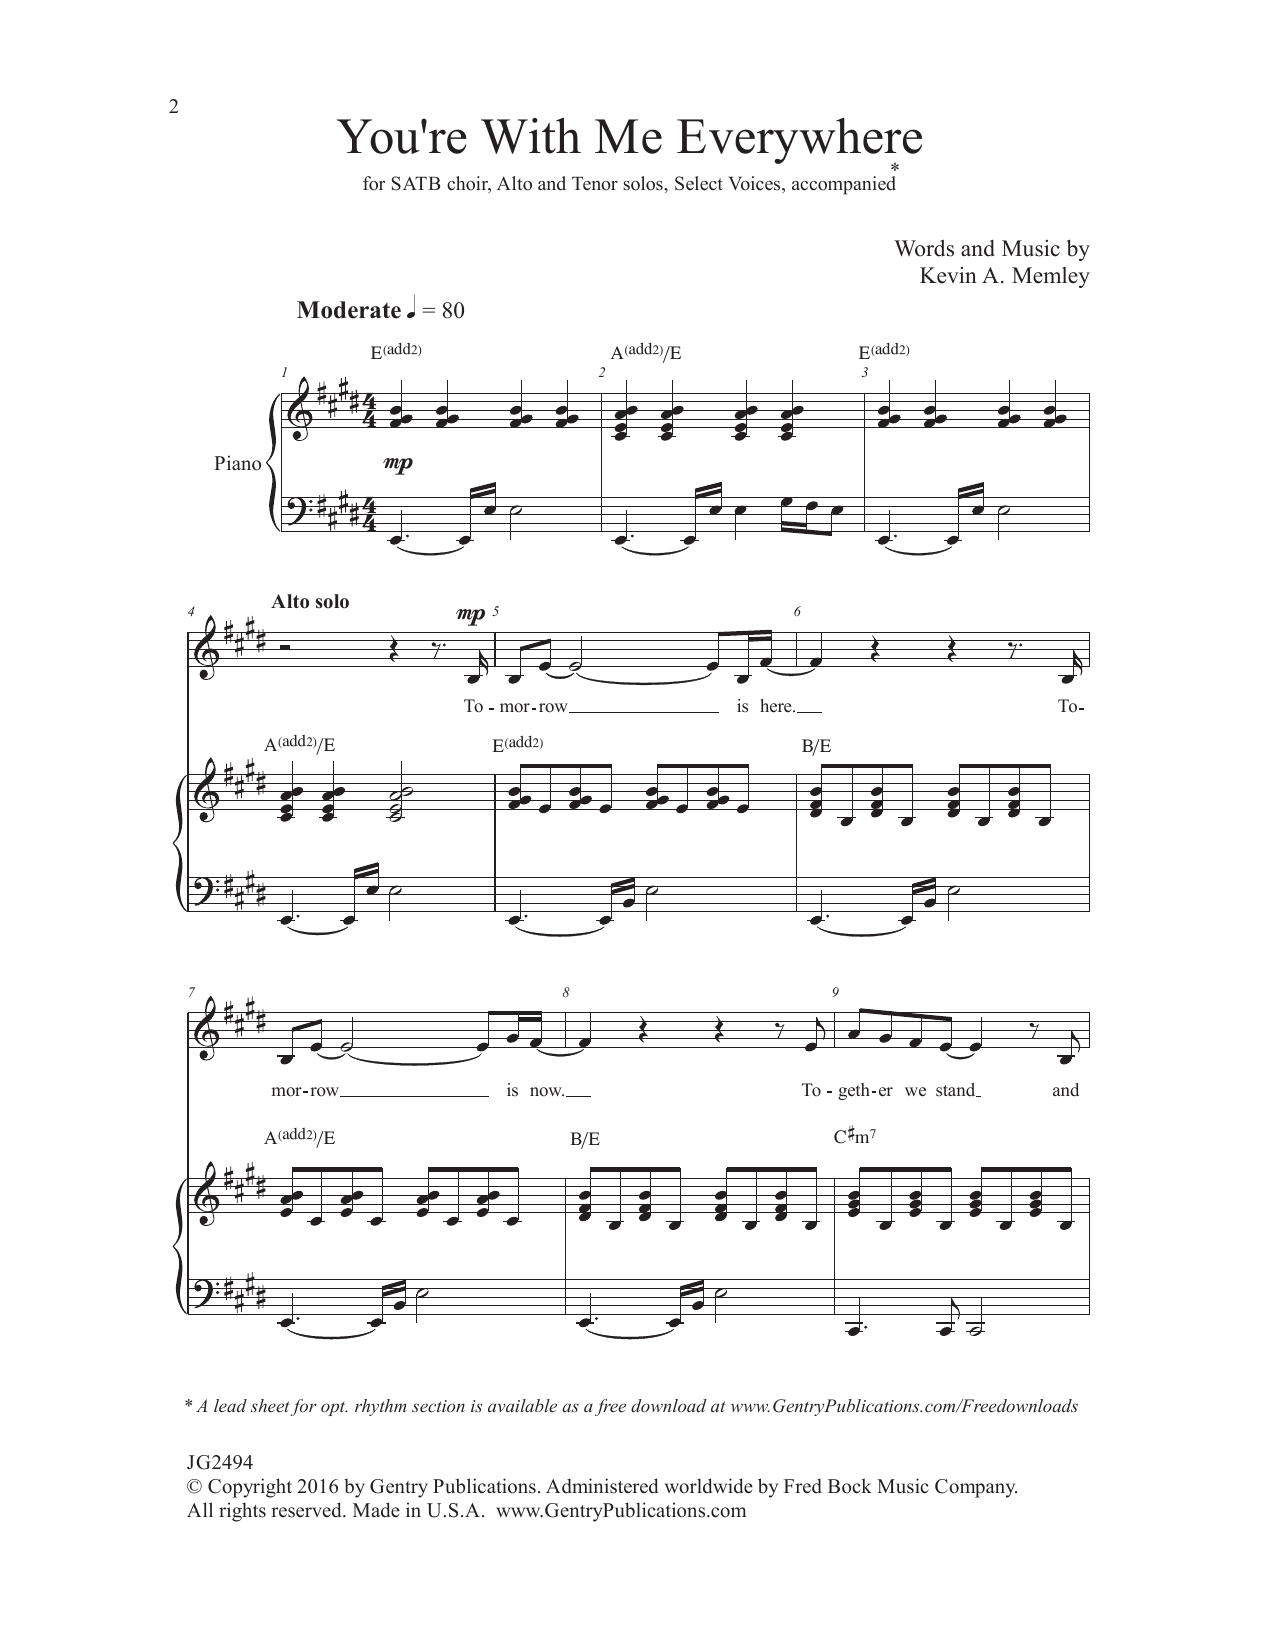 Download Kevin A. Memley You're with Me Everywhere Sheet Music